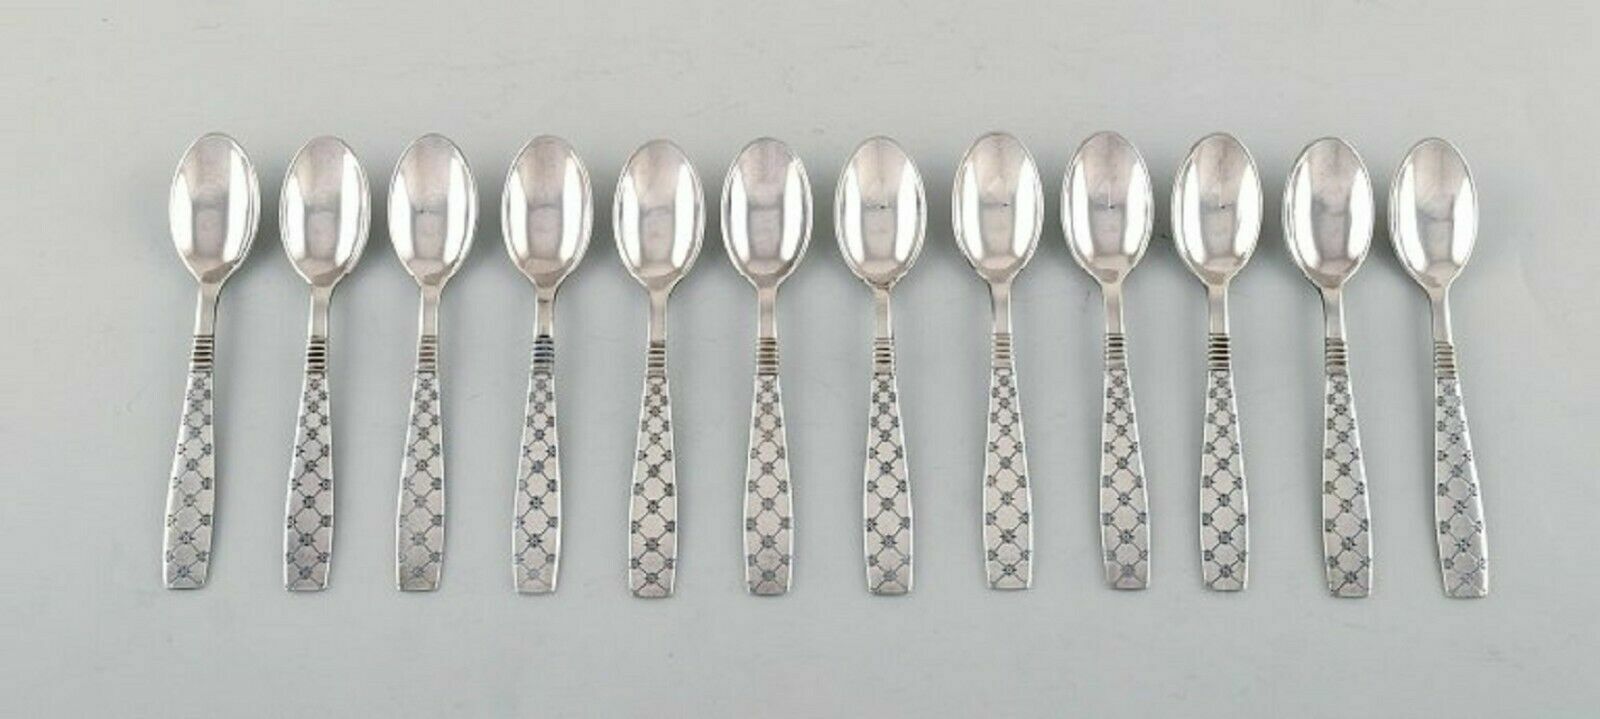 Jens H. Quistgaard (1919-2008), Denmark. 12 Star teaspoons in plated silver.